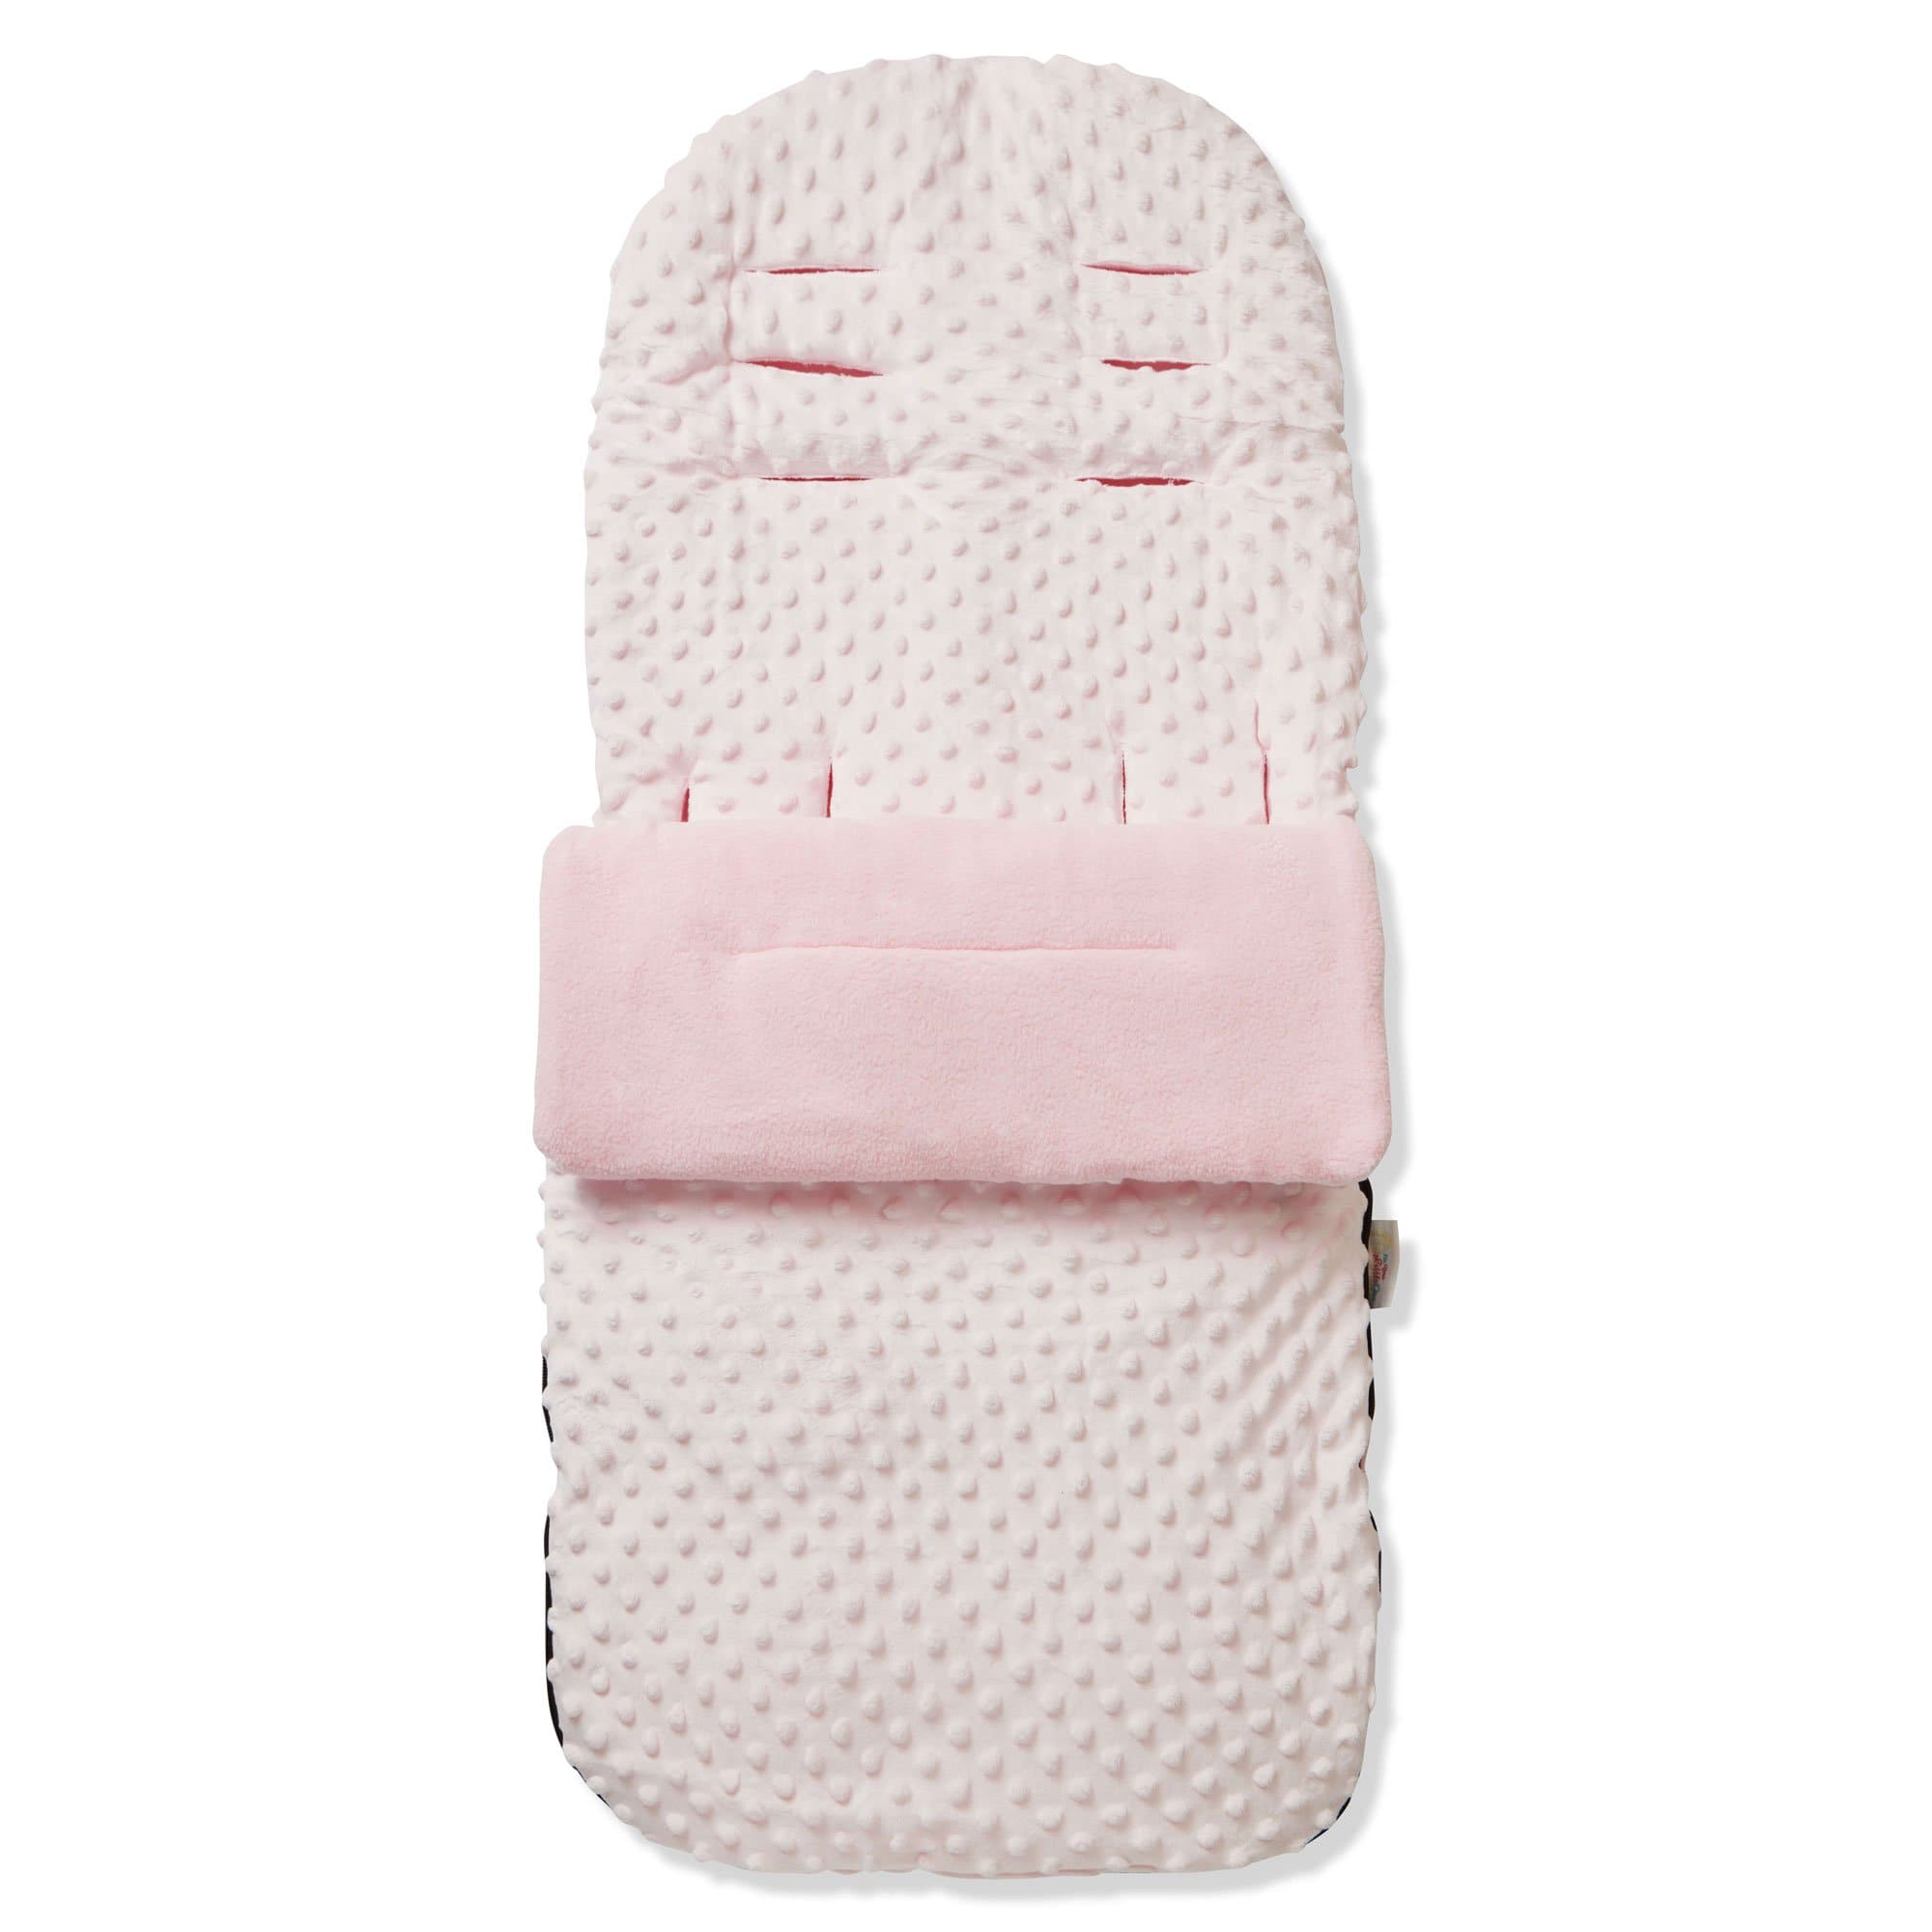 Dimple Footmuff / Cosy Toes Compatible with Excel - Pink / Fits All Models | For Your Little One